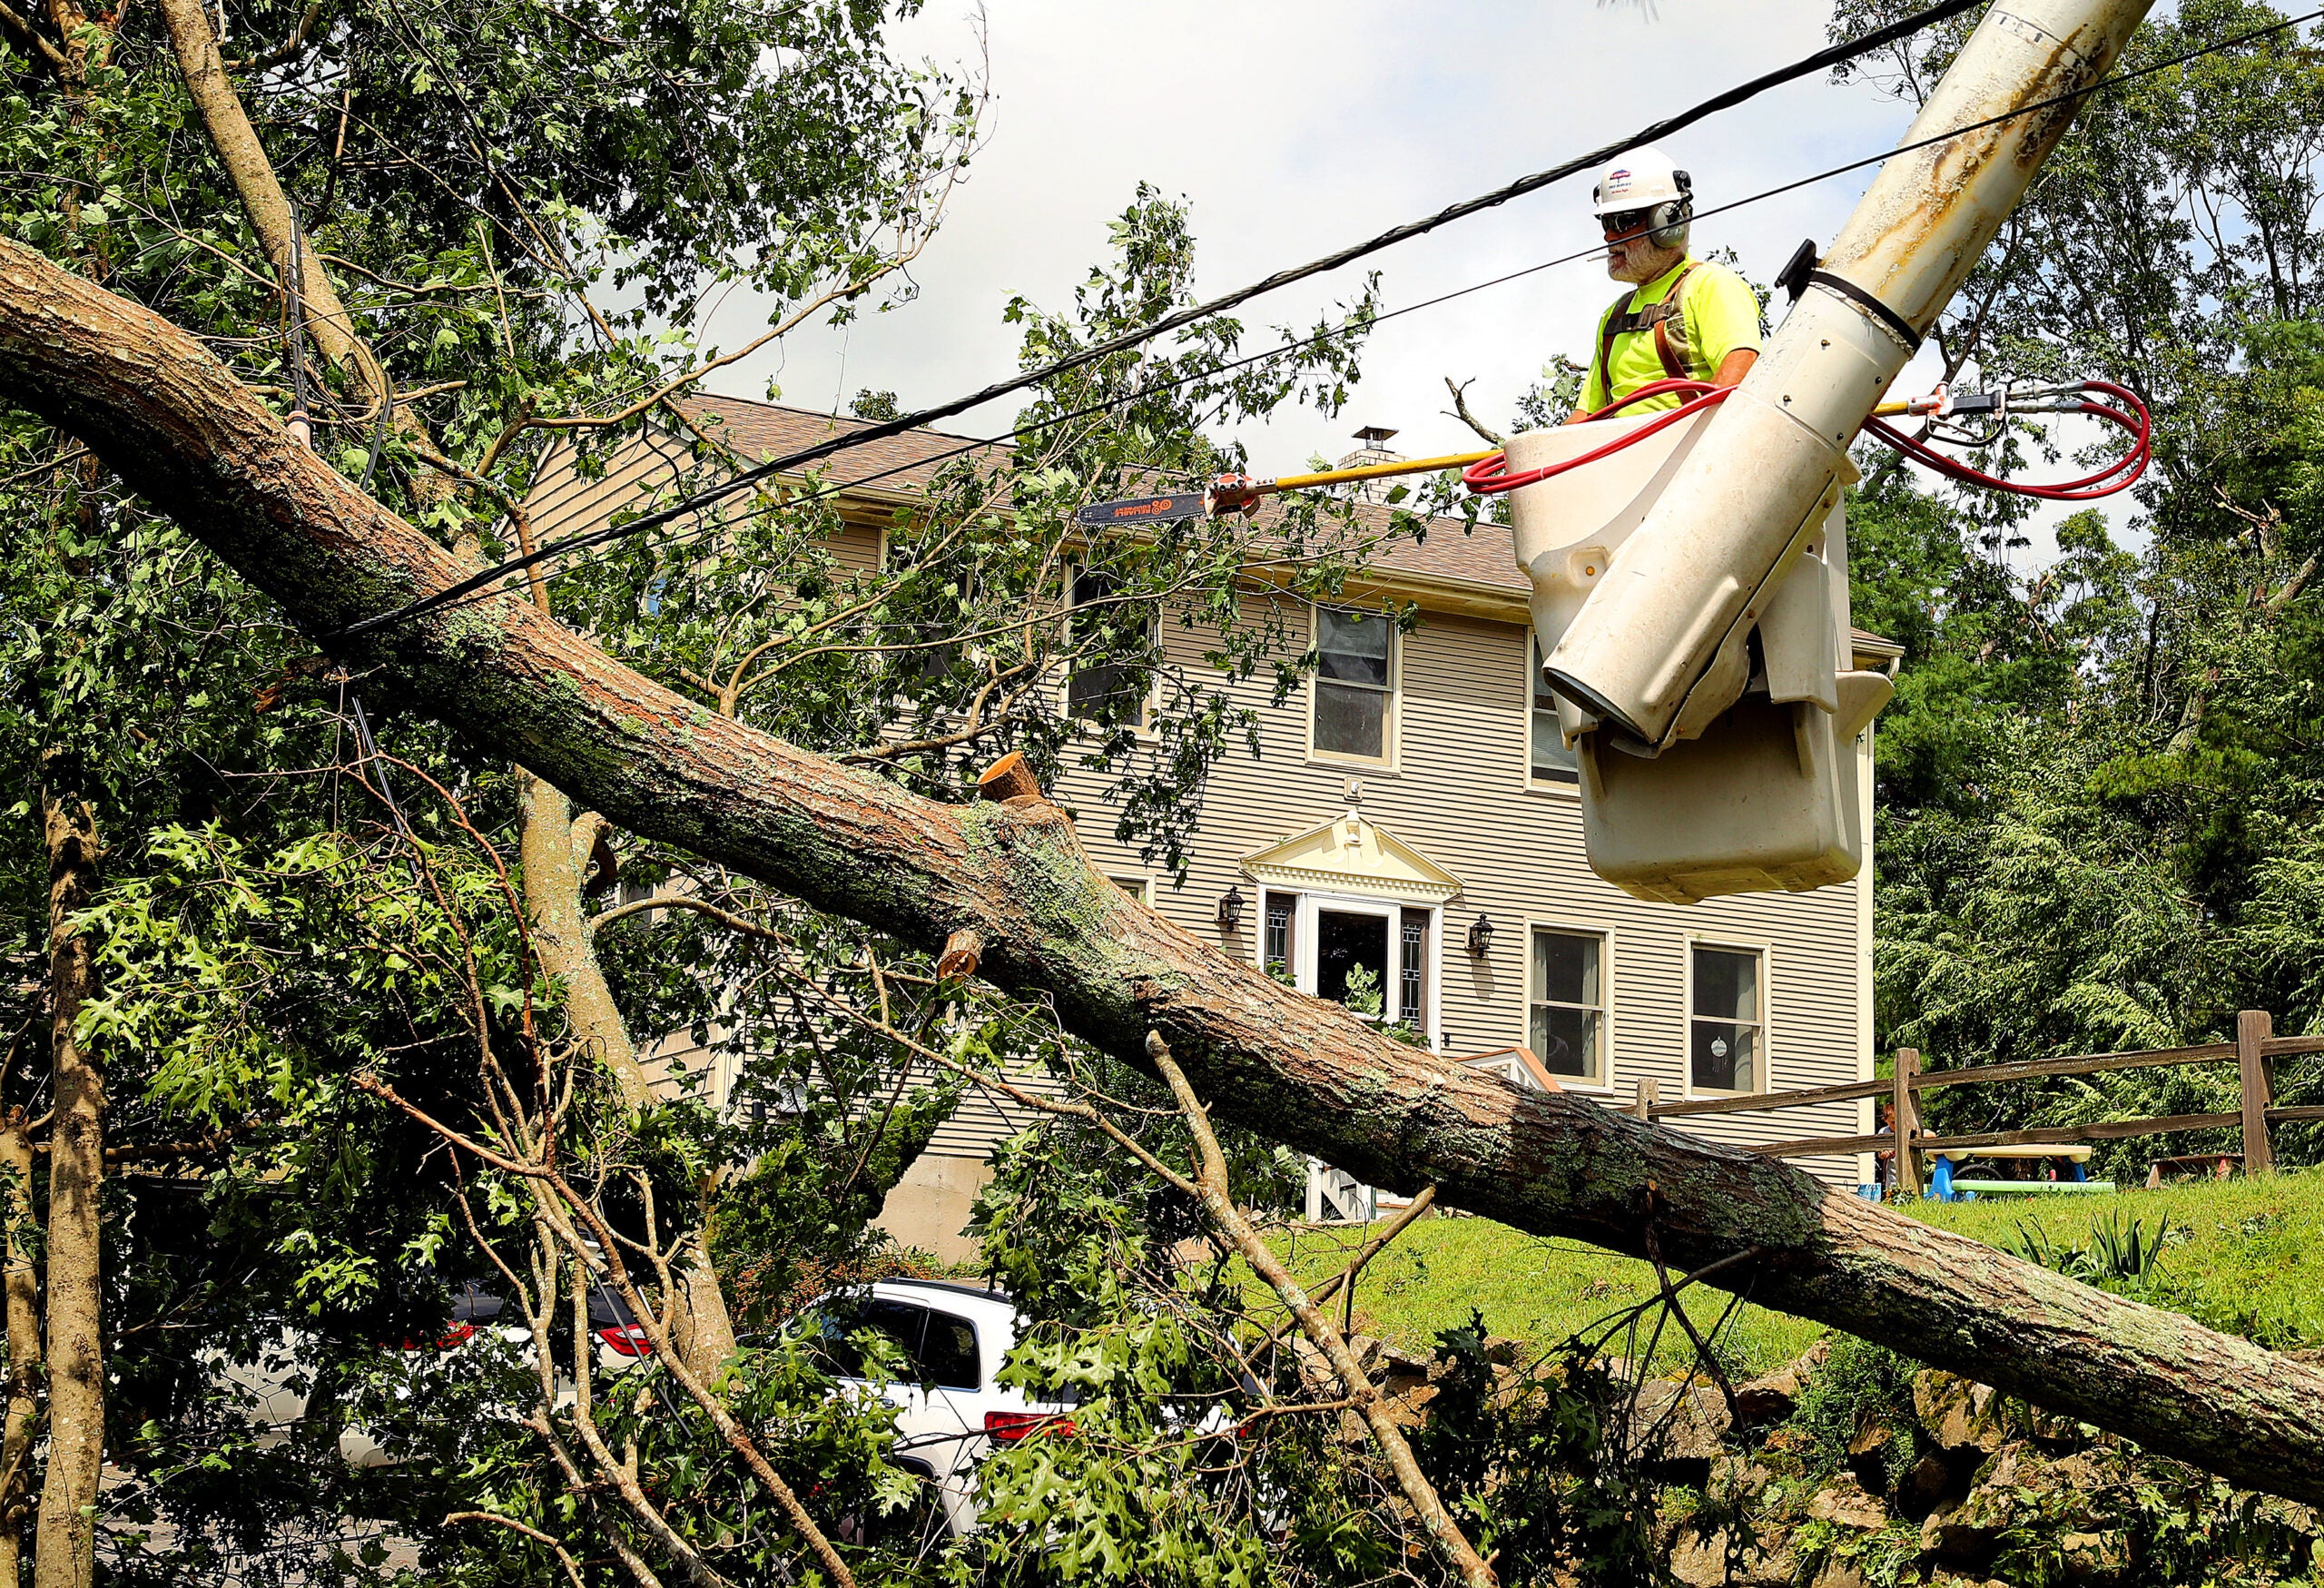 A worker in a bucket truck cuts branches on a downed tree that is atop power lines, in front of a brown two-story home.